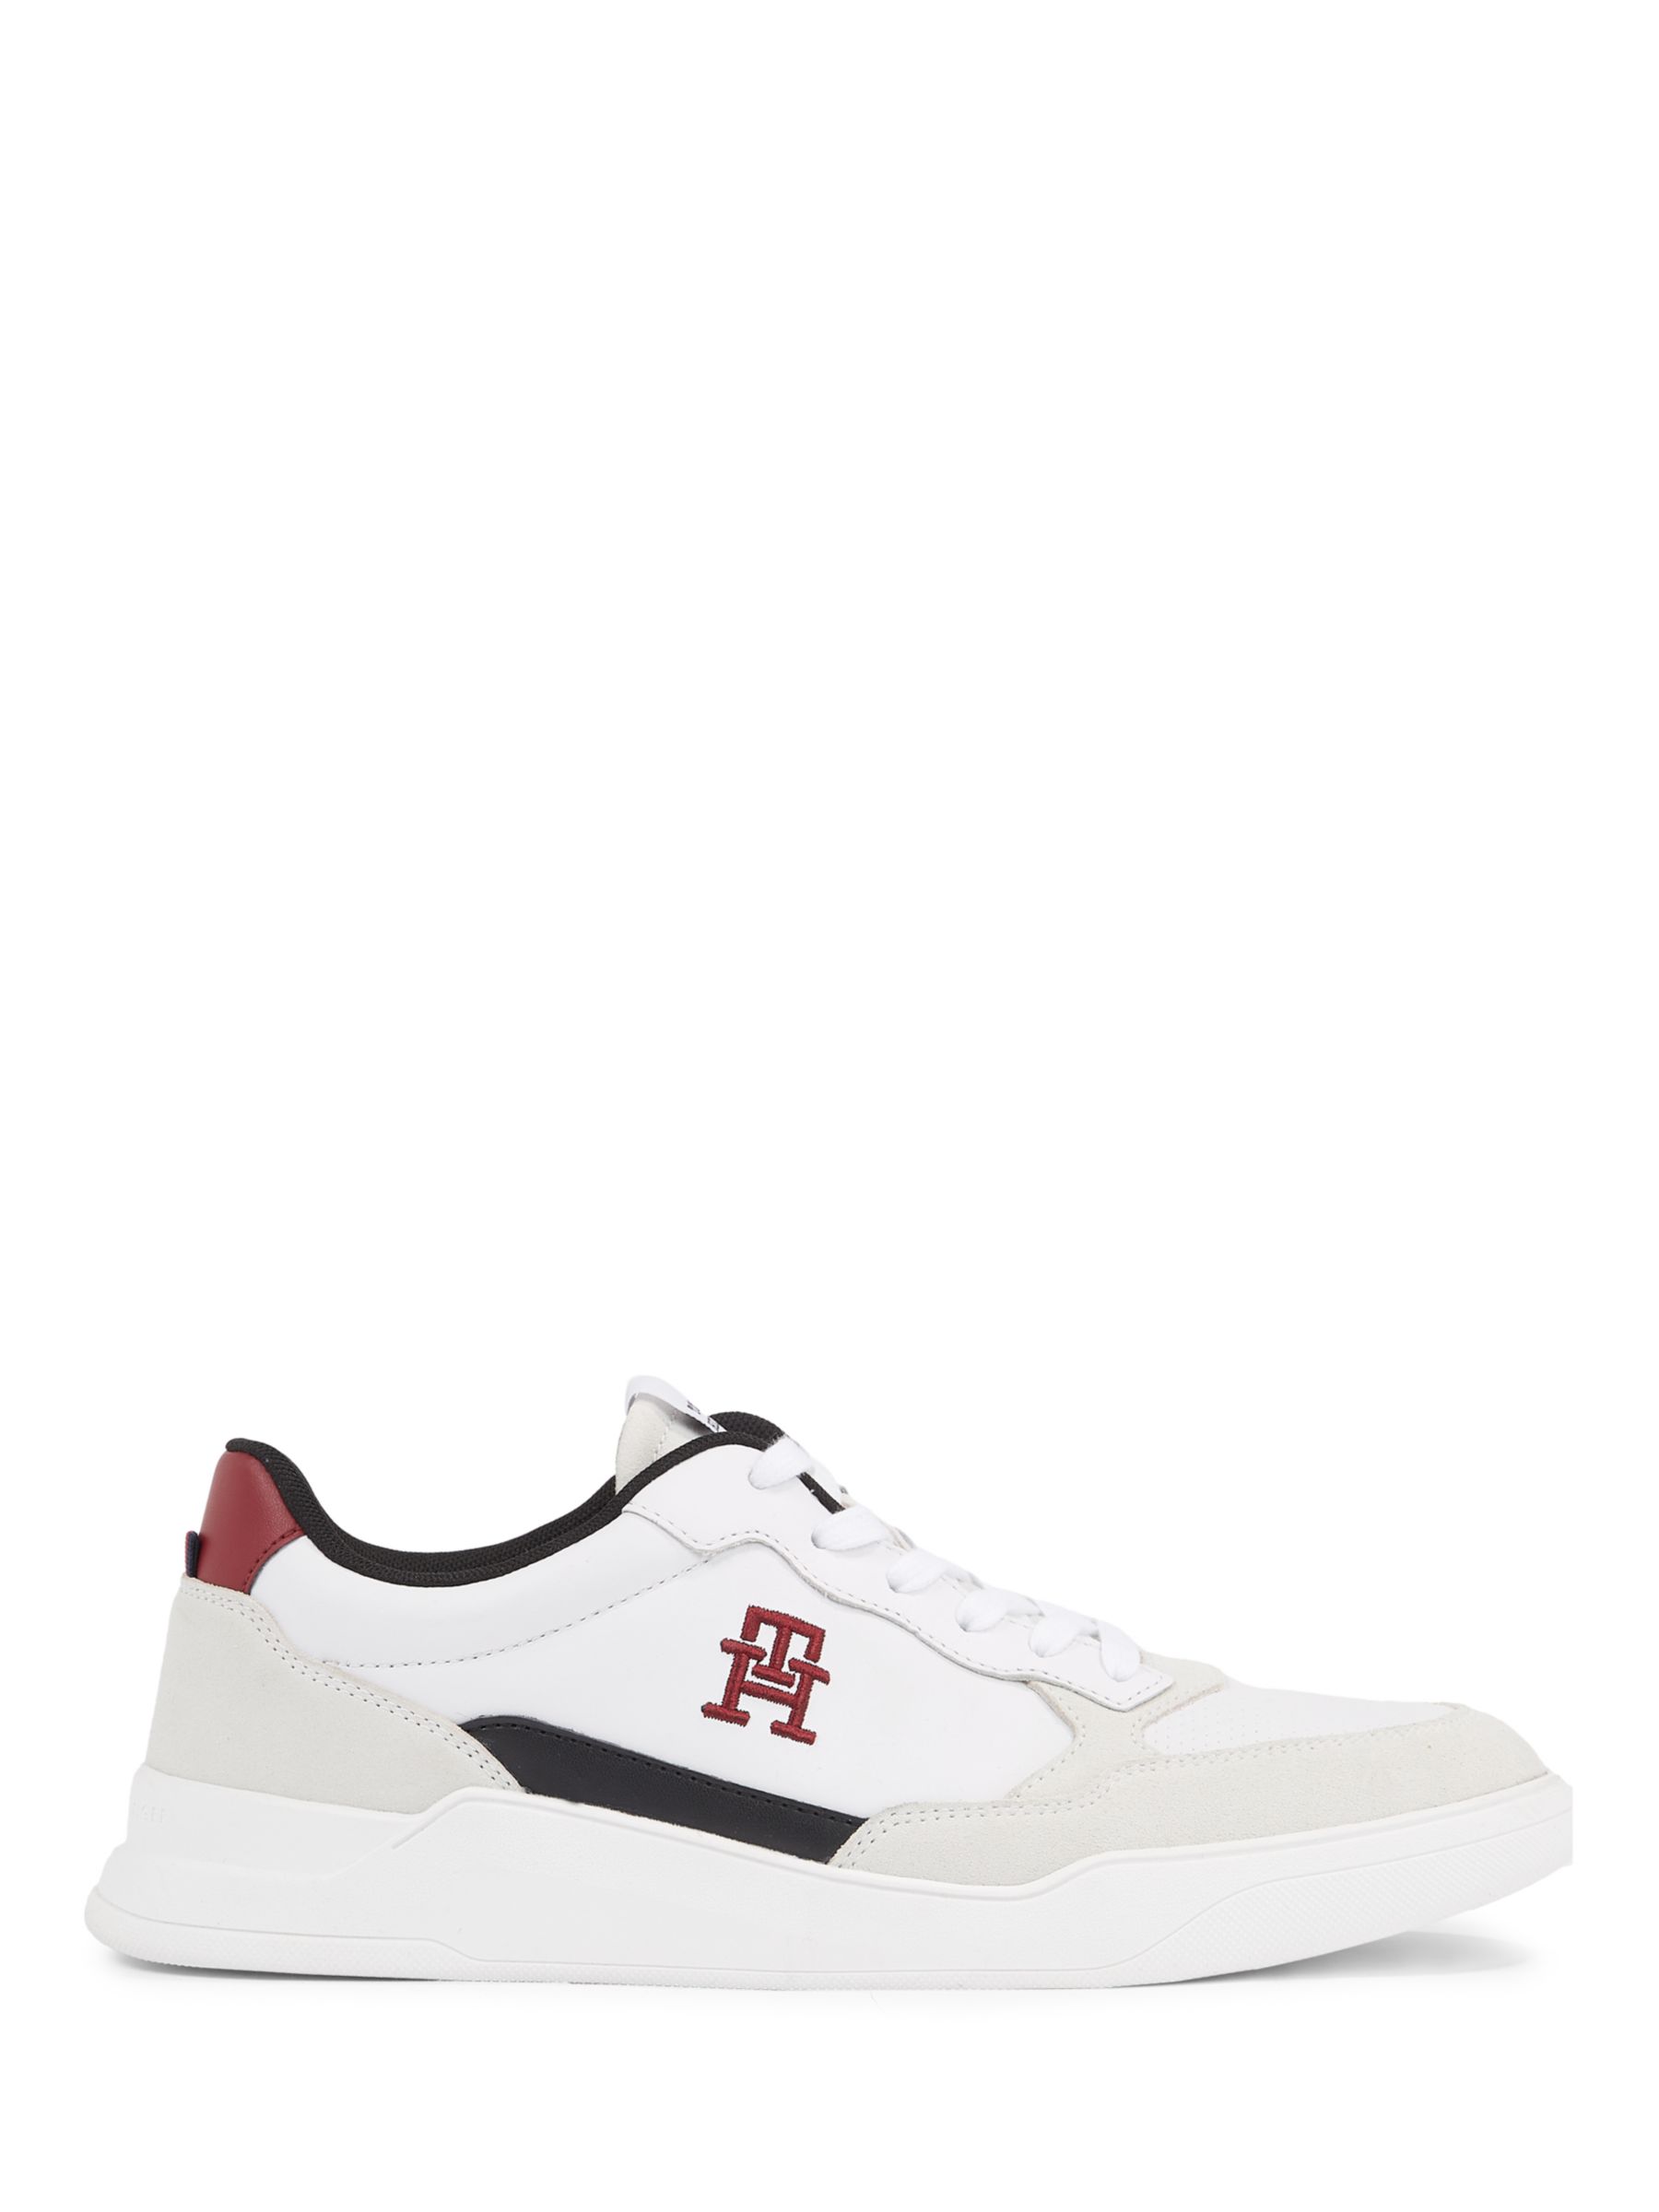 Tommy Hilfiger Elevated Cupsole Leather Trainers, White/Multi, EU41